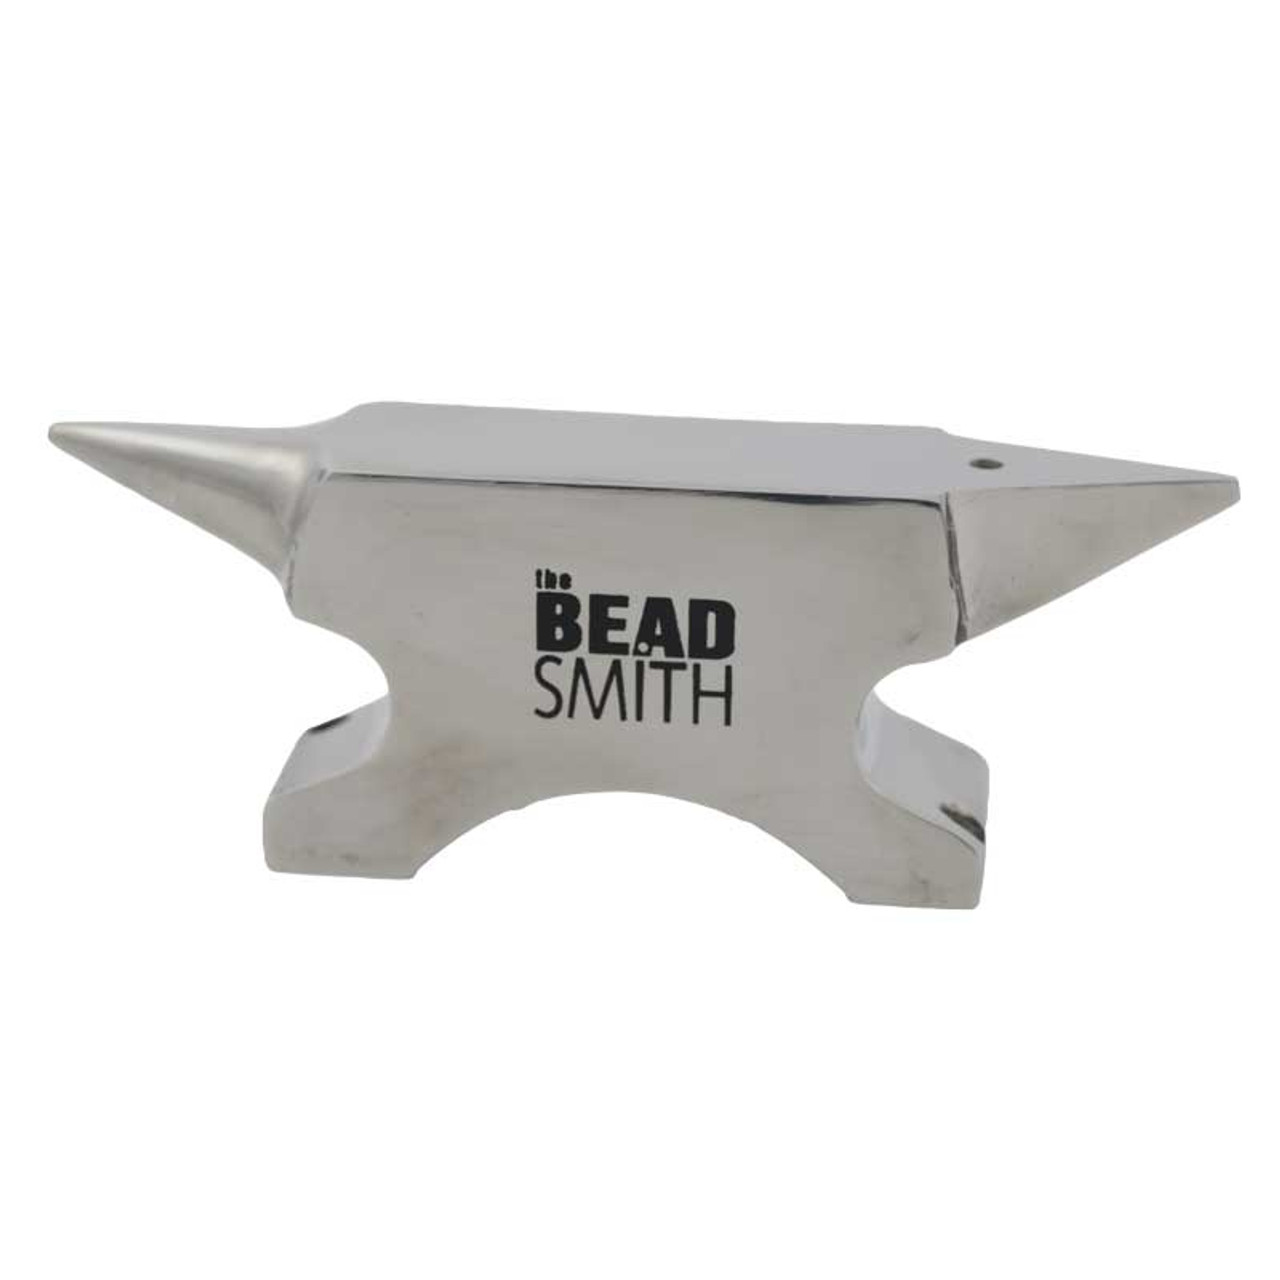 Mini Anvil with Base. Metal Clay Discount Supply